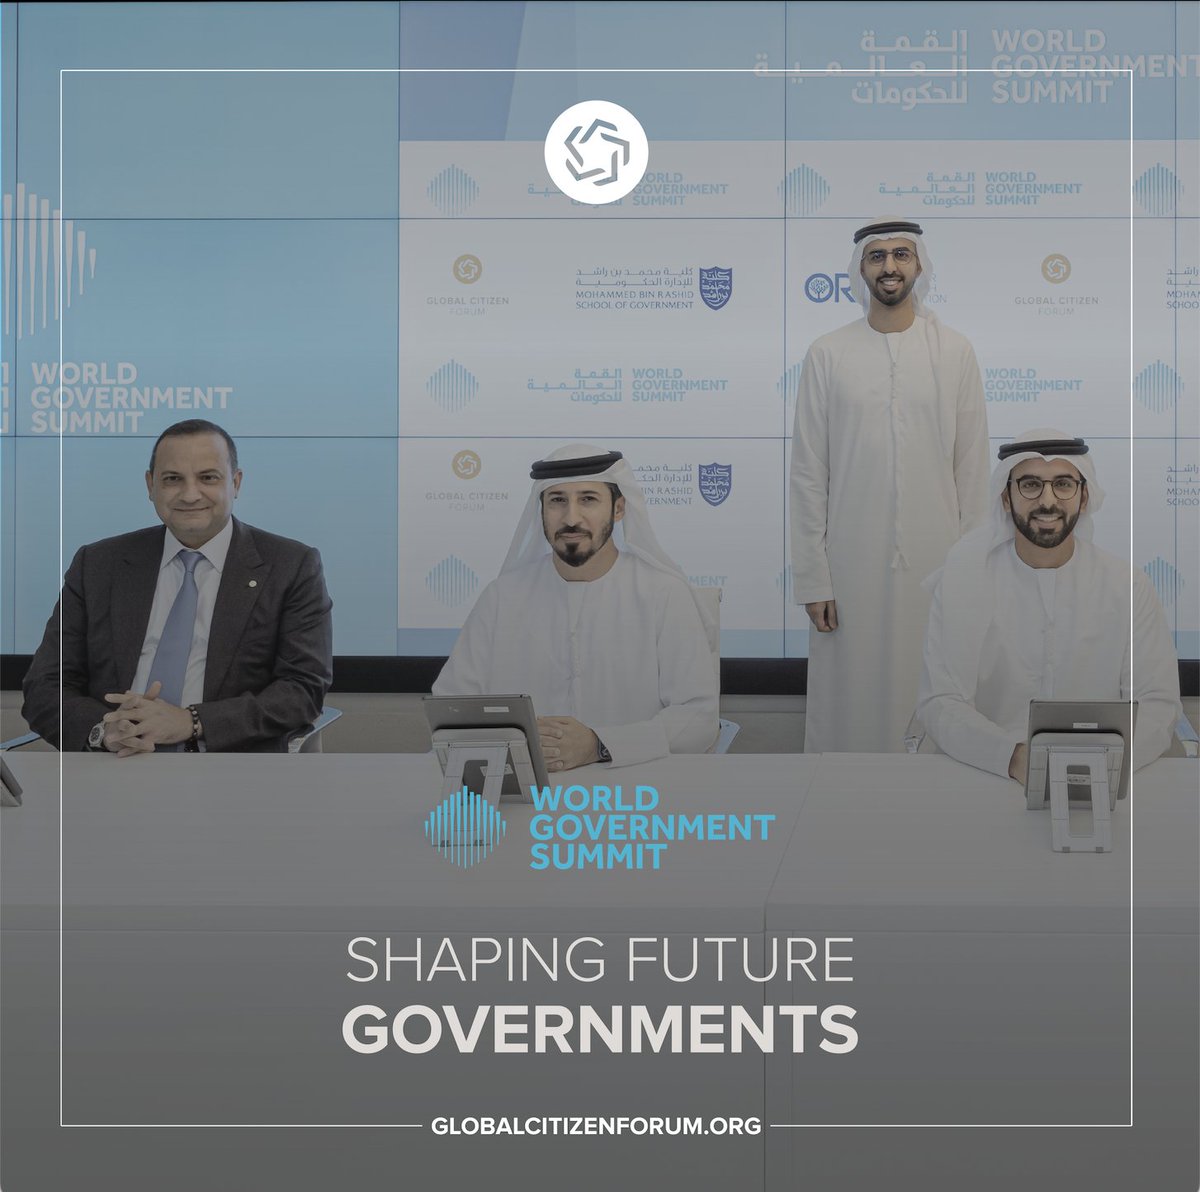 GCF is honored to have partnered with the World Government Summit that sets the agenda for the following generation of governments, focusing on how they may use innovation and technology to address the most pressing problems that humanity faces. #WGS23 #GlobalCitizenForum